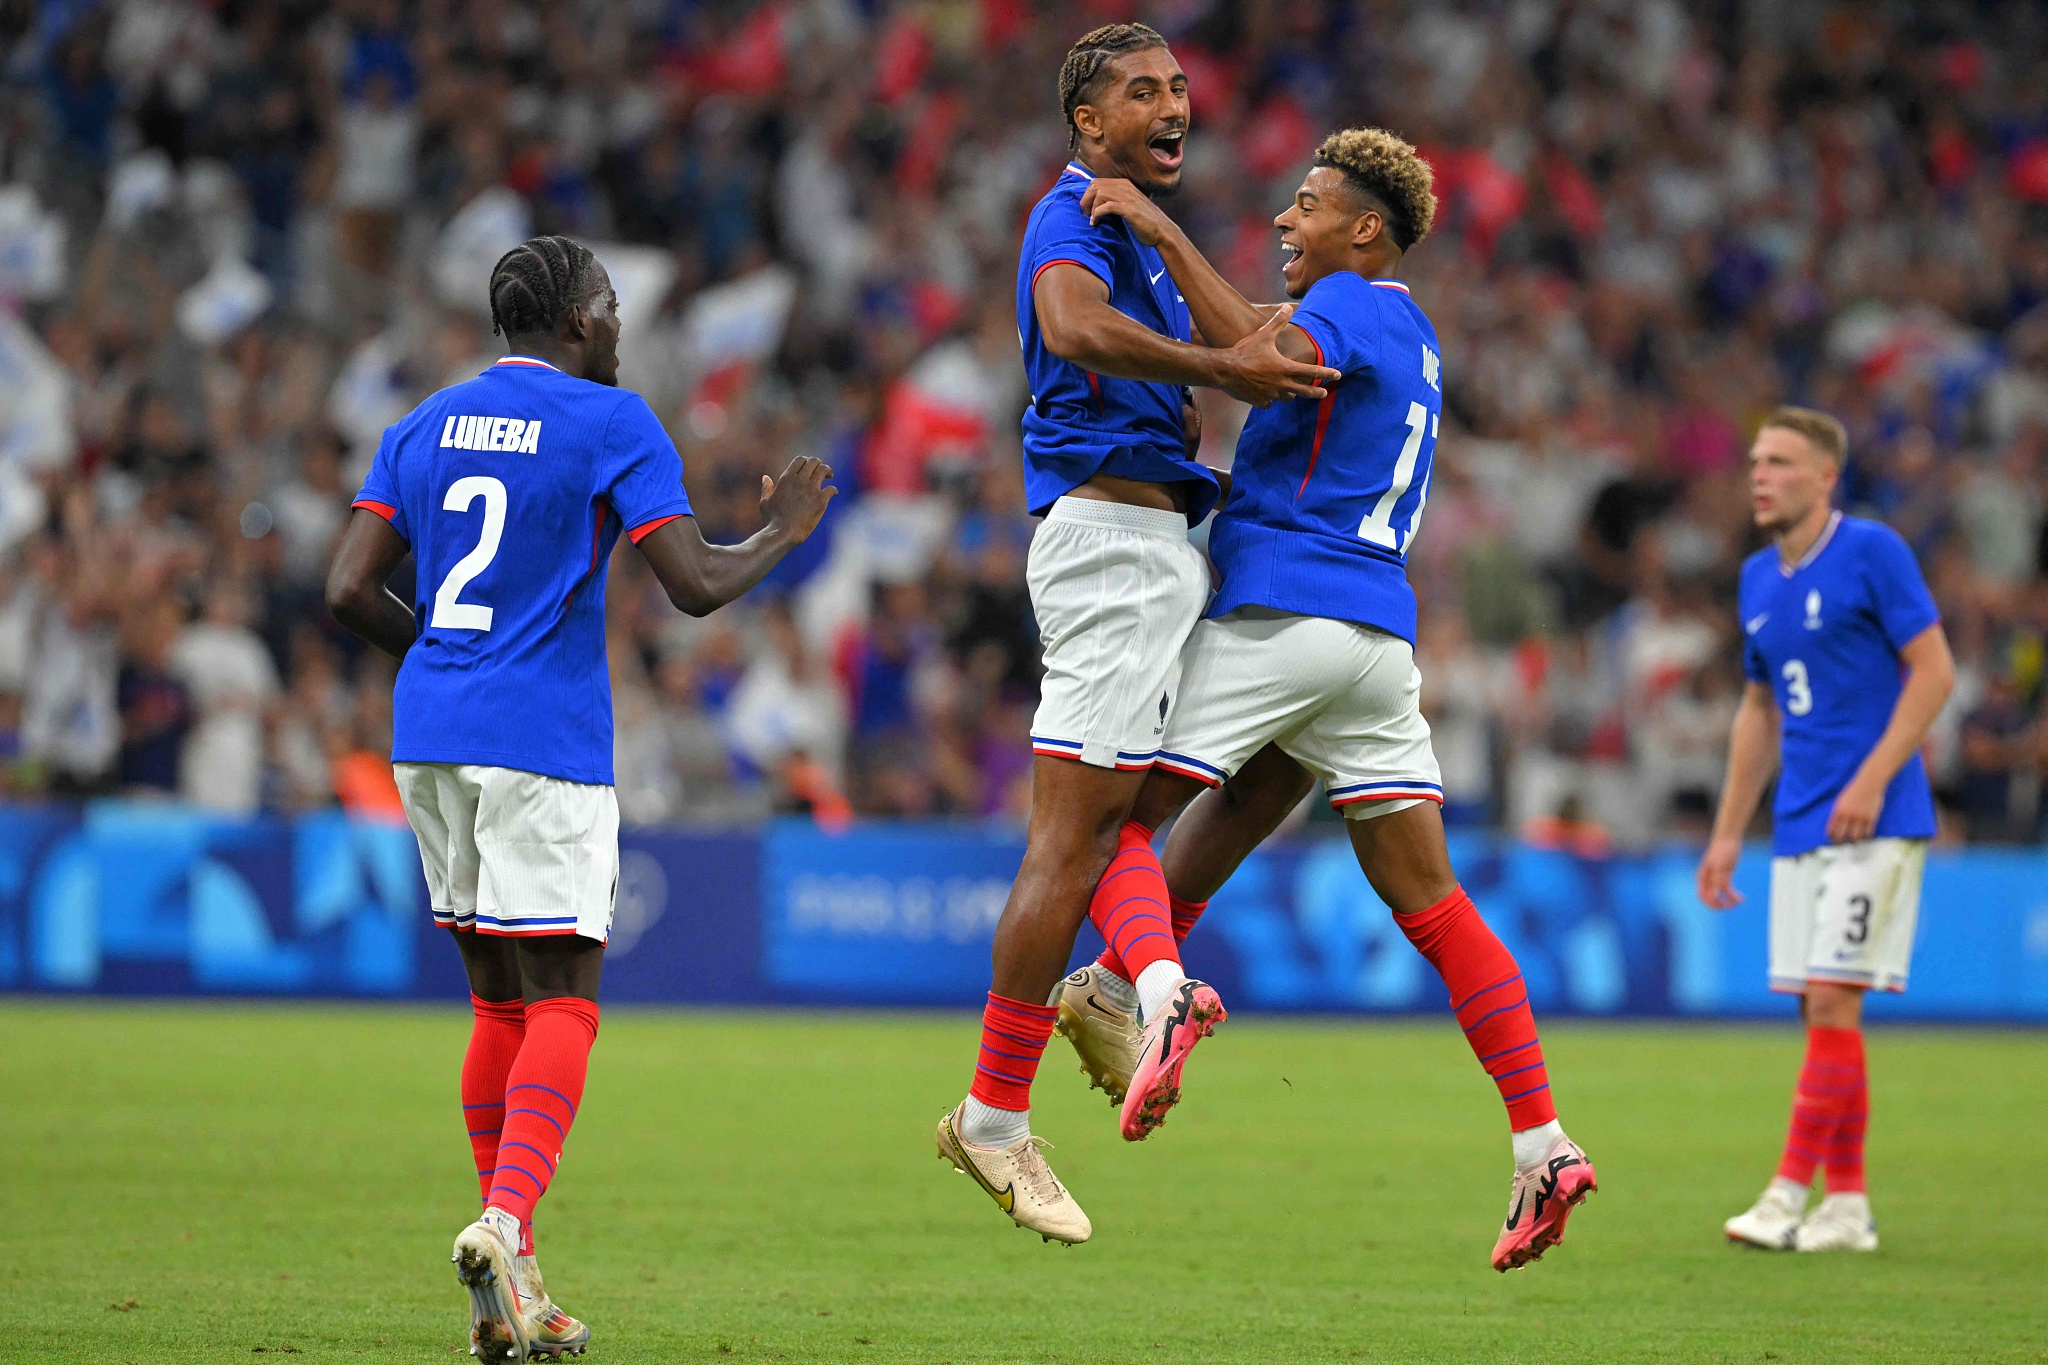 Players from France celebrate after scoring a goal in their men's football game against the USA at the 2024 Summer Olympics in Marseille, France, July 24, 2024. /CFP